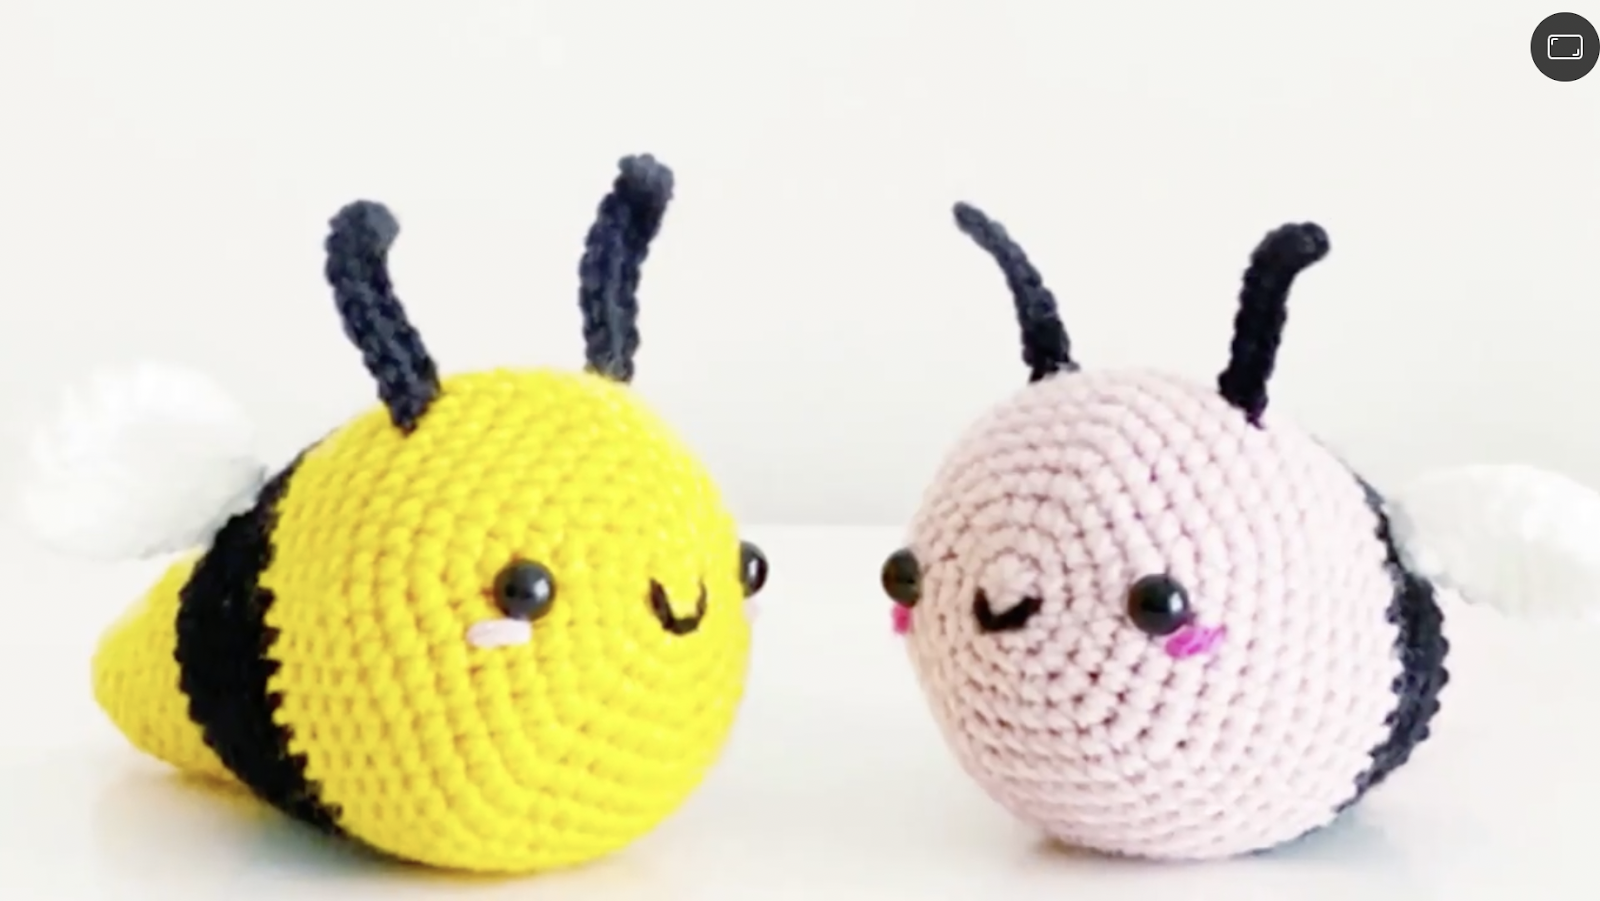 bees made out of knitting